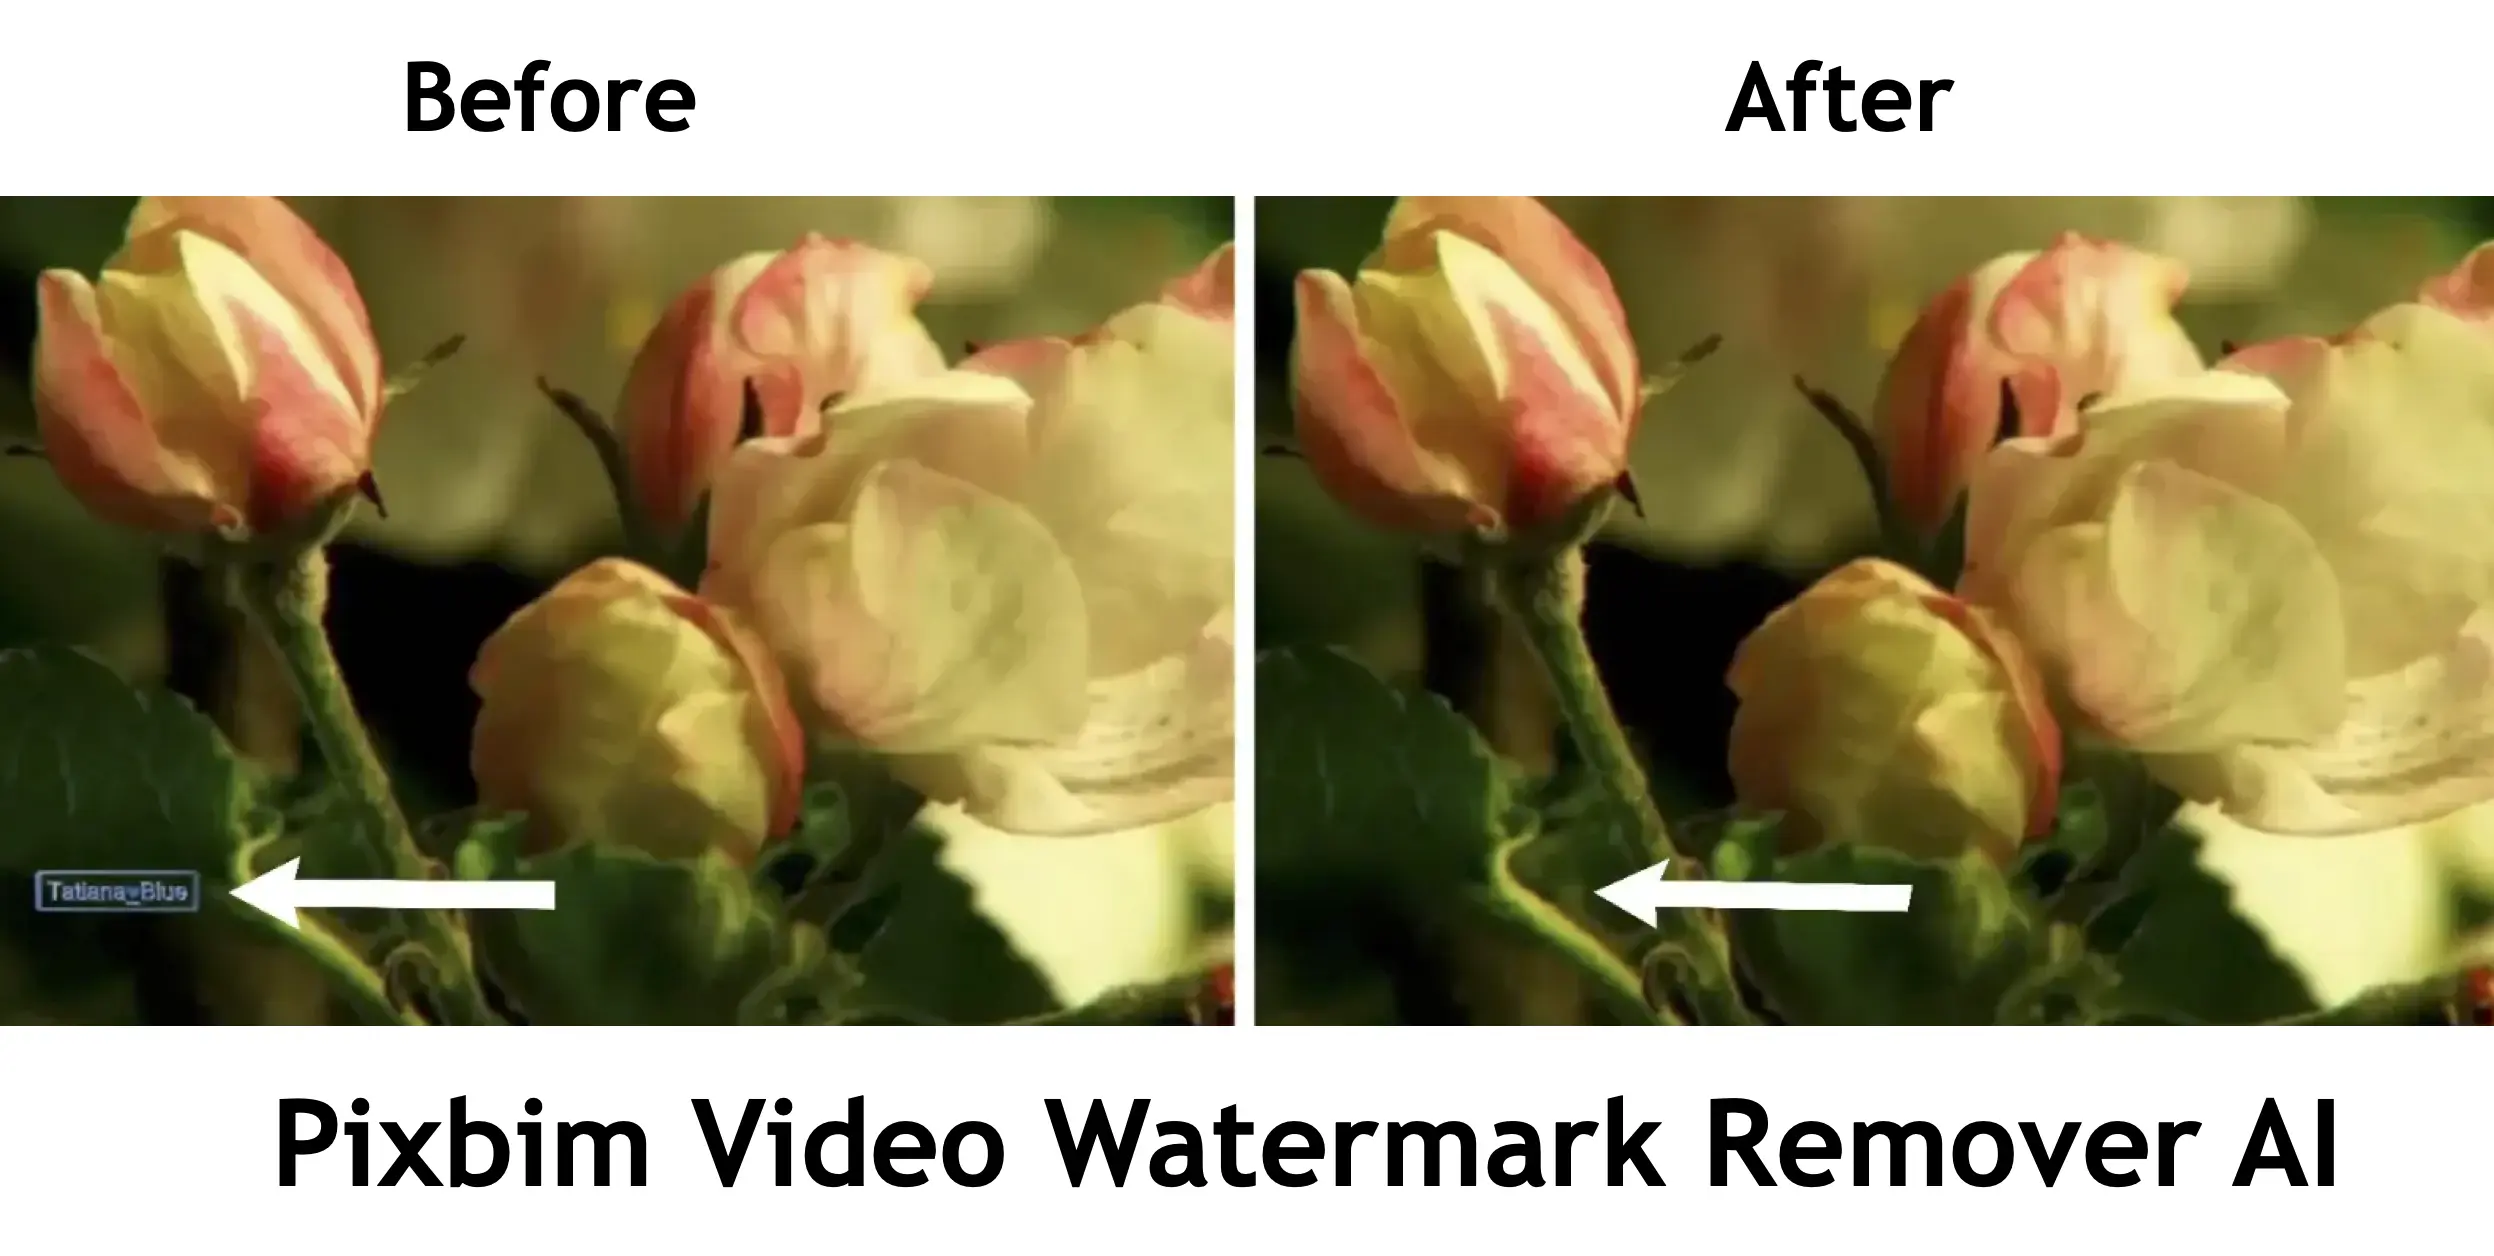 remove watermark from video